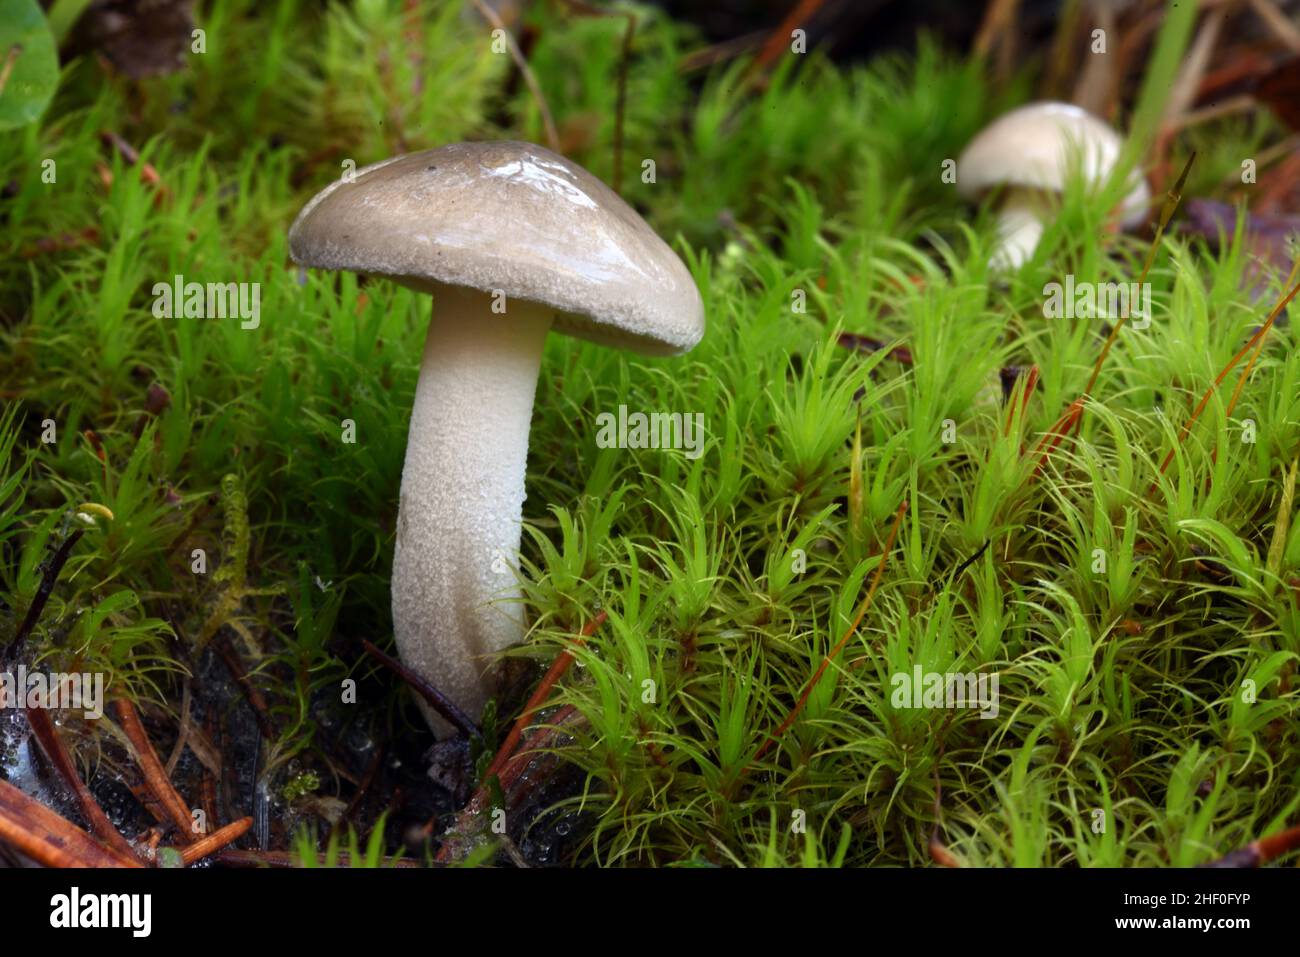 White Woodwax or Waxy Cap Mushroom Hygrophorus piceae Growing Among Moss on Forest Floor Stock Photo